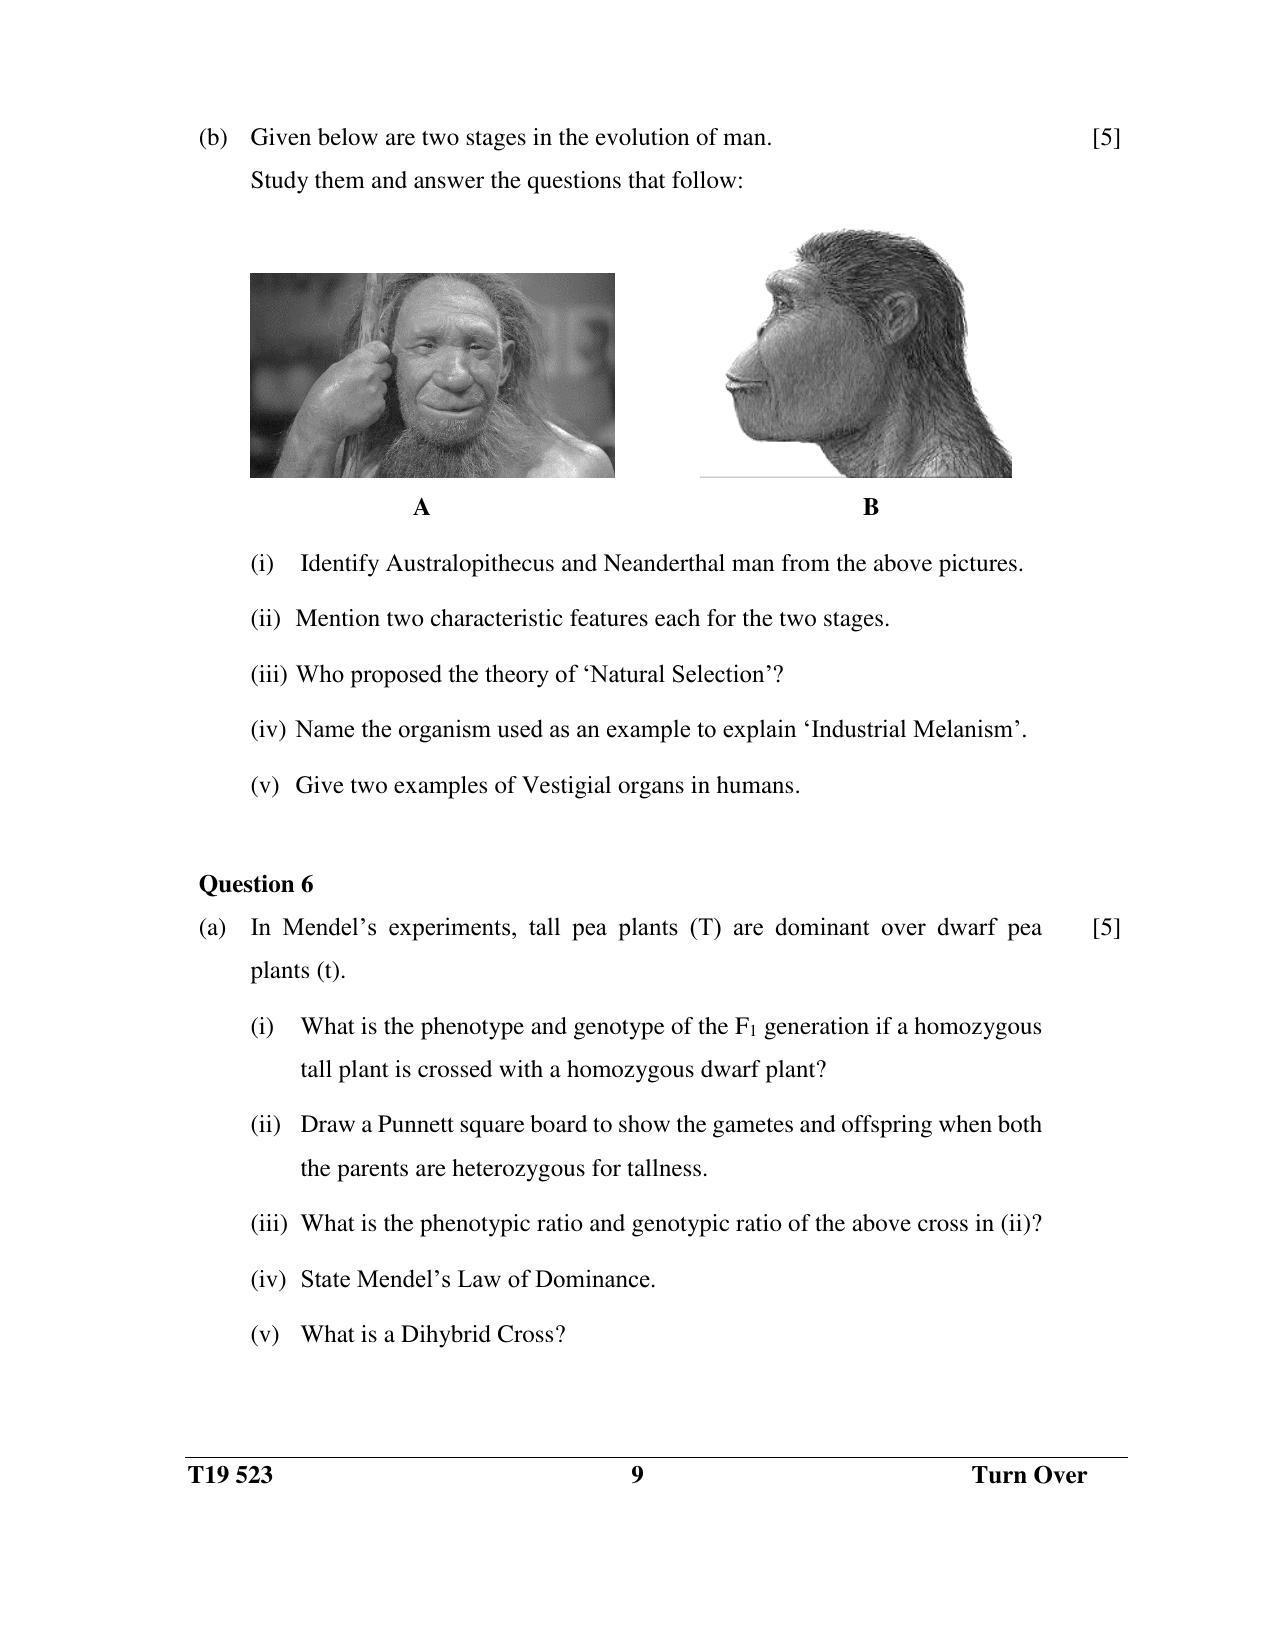 ICSE Class 10 Science Paper 3 (Biology) 2019 Question Paper - Page 9